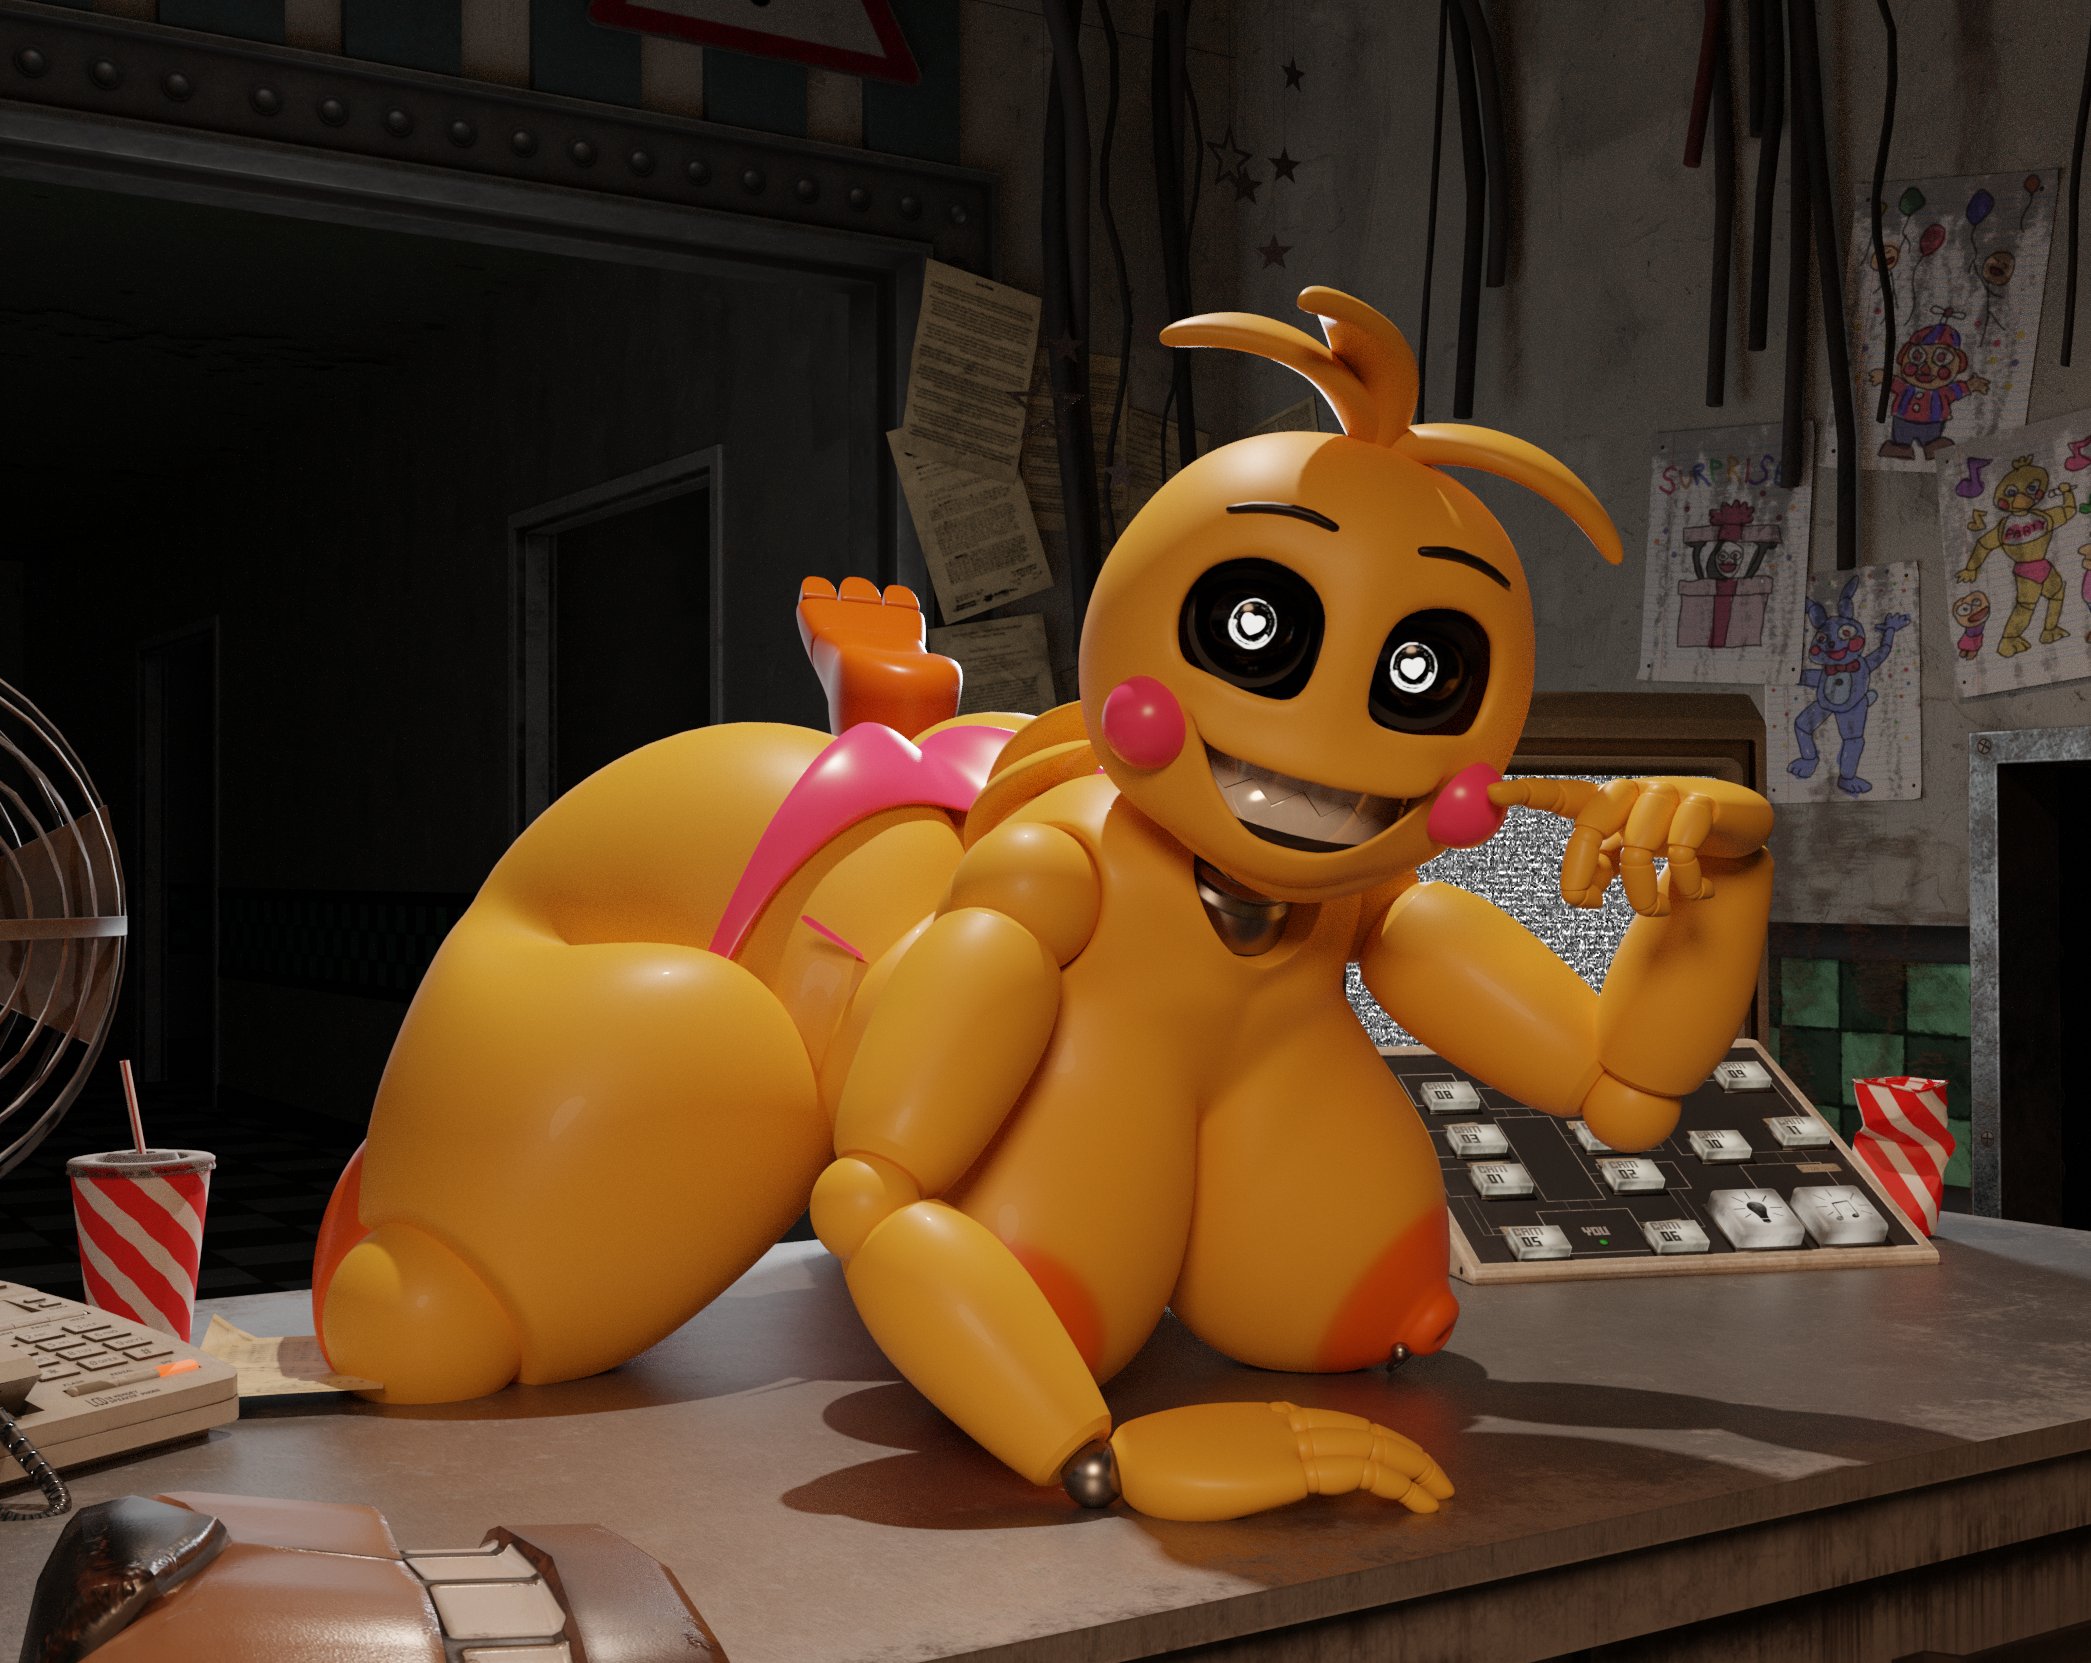 Rule34 - If it exists, there is porn of it / toy chica (fnaf